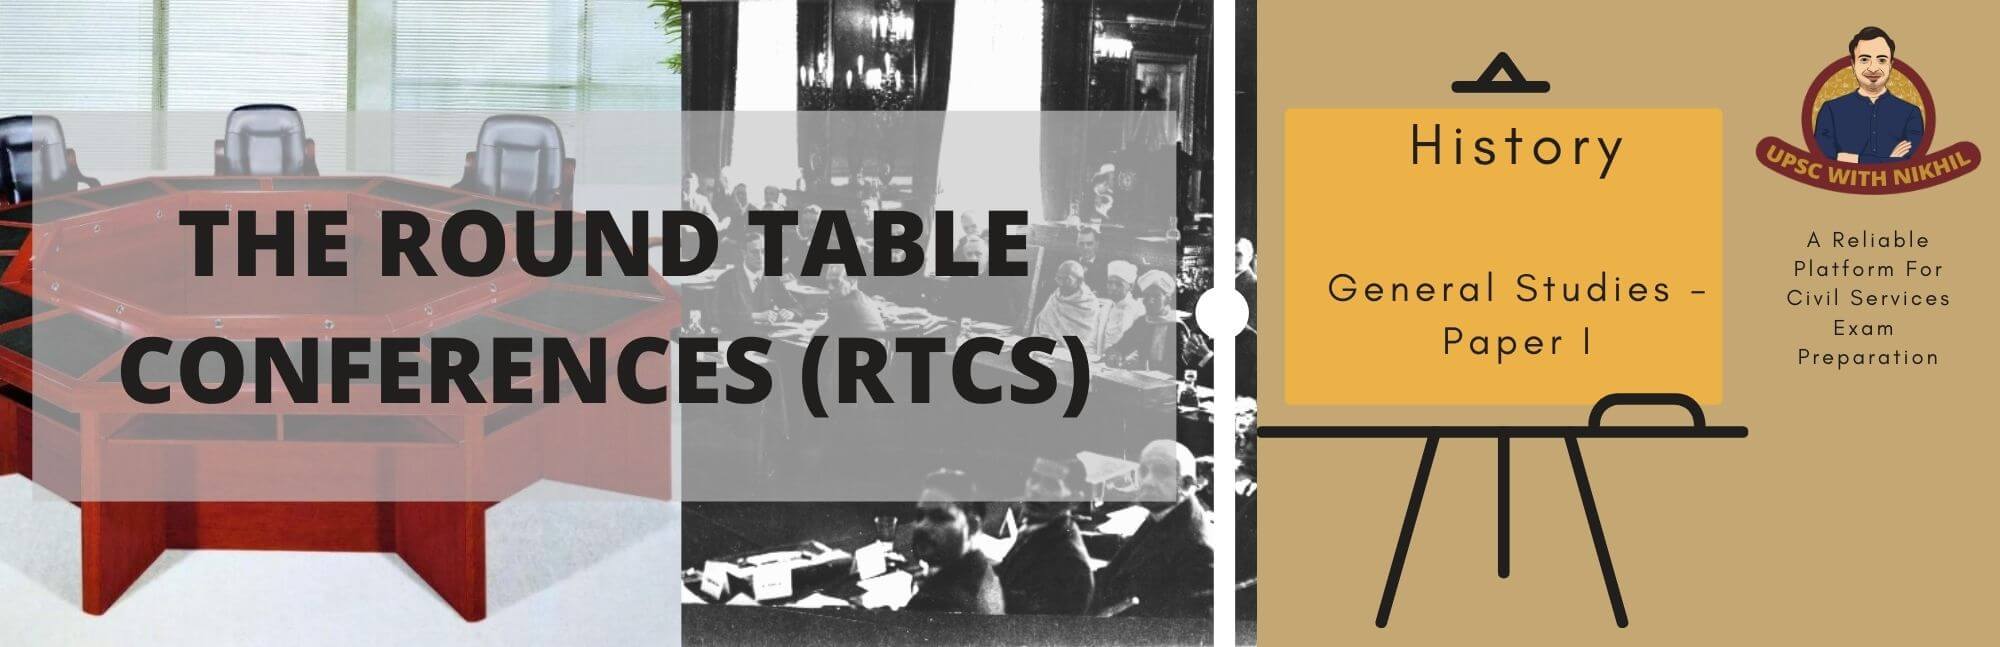 The Round Table Conferences Rtcs, How Many Round Table Conferences Were Held And With What Results